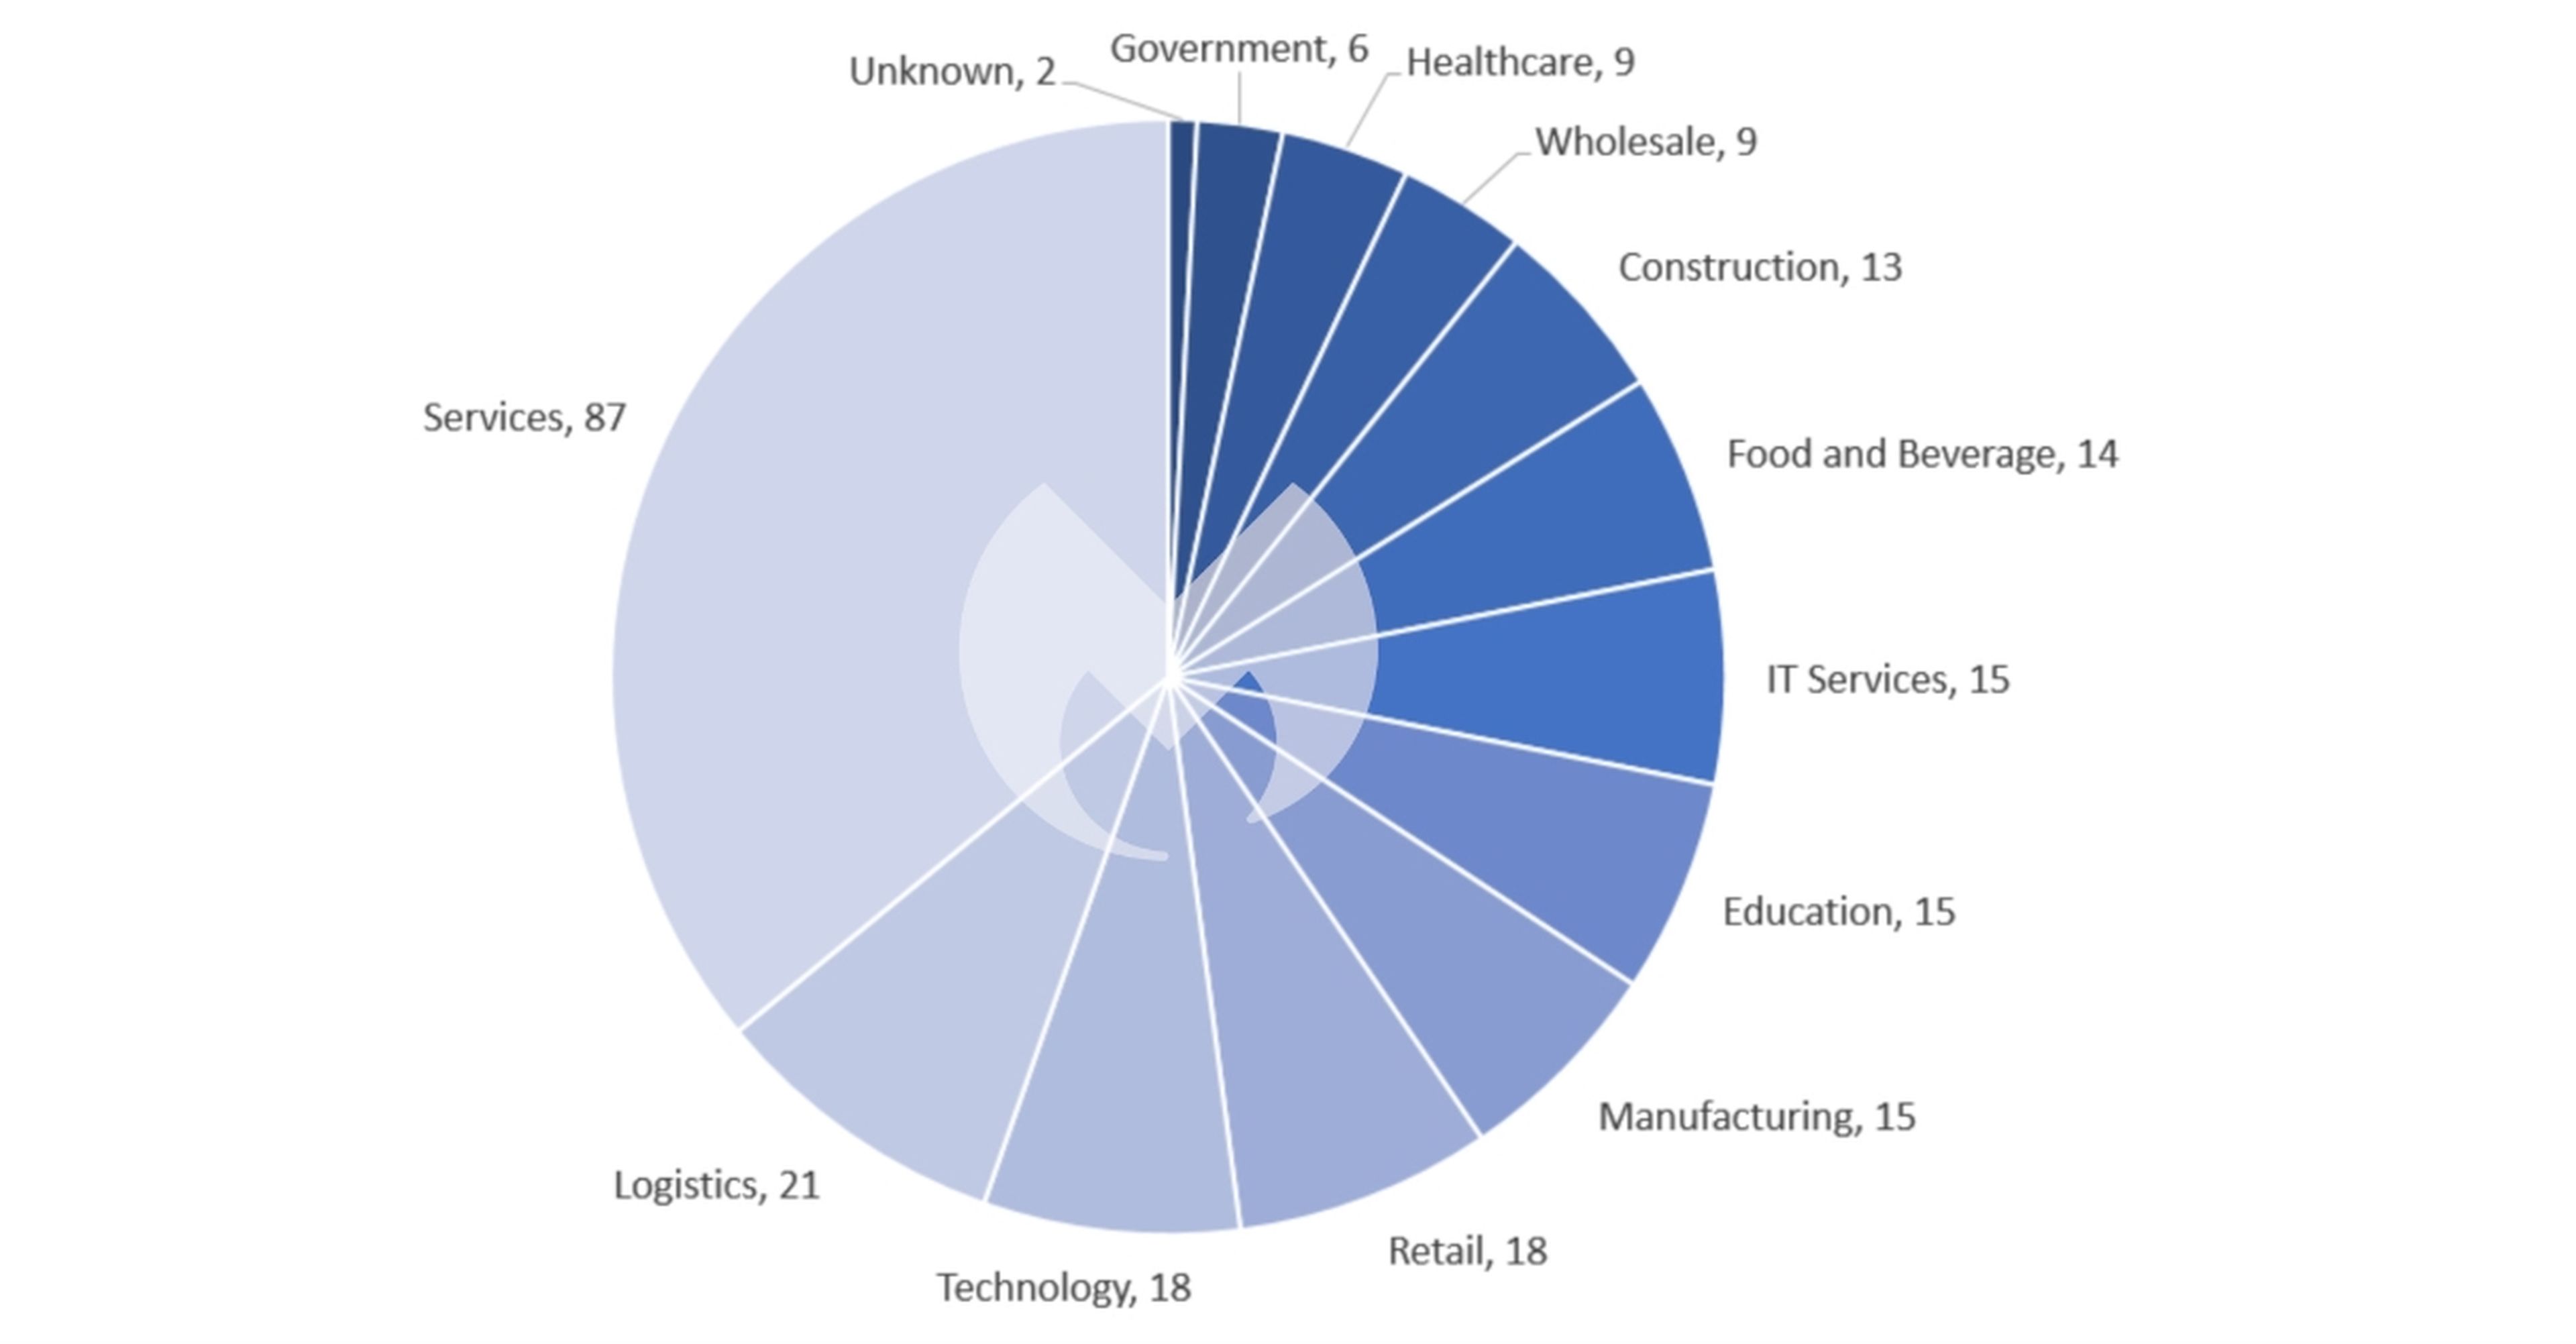 Known ransomware attacks by industry sector, February 2023. Source: Malwarebytes